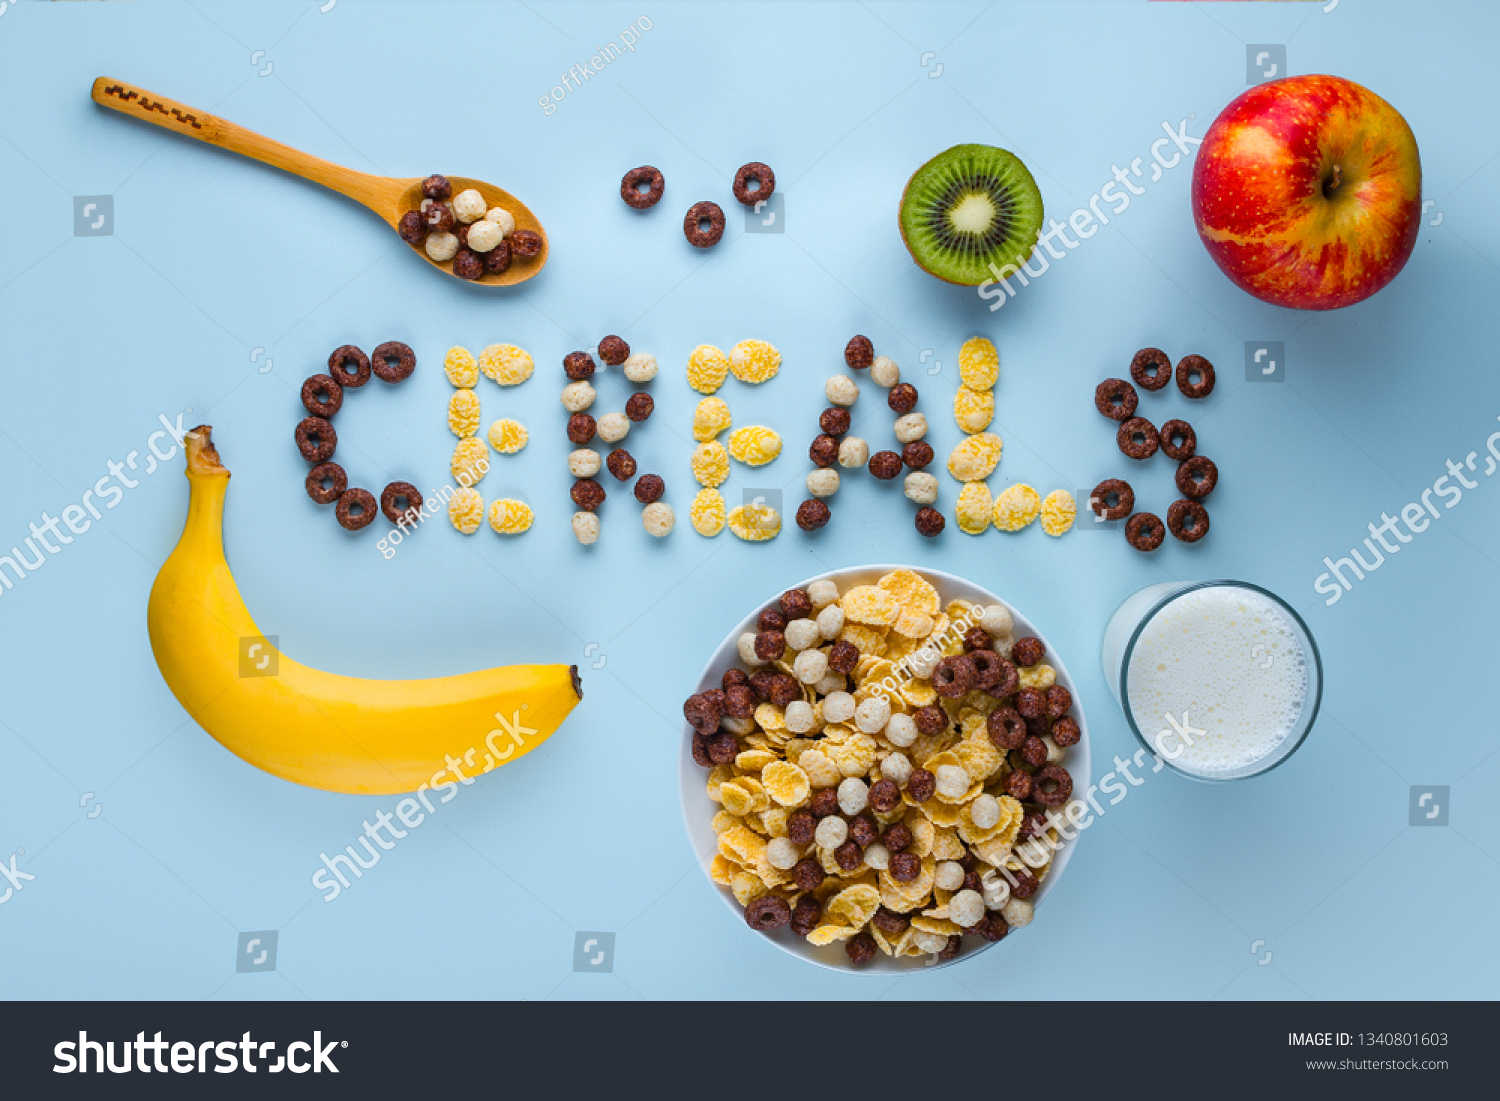 Bowl and spoon with dry chocolate balls, rings, corn flakes, glass of milk and fresh ripe fruits for healthy fiber cereals breakfast. Cereals concept  #1340801603